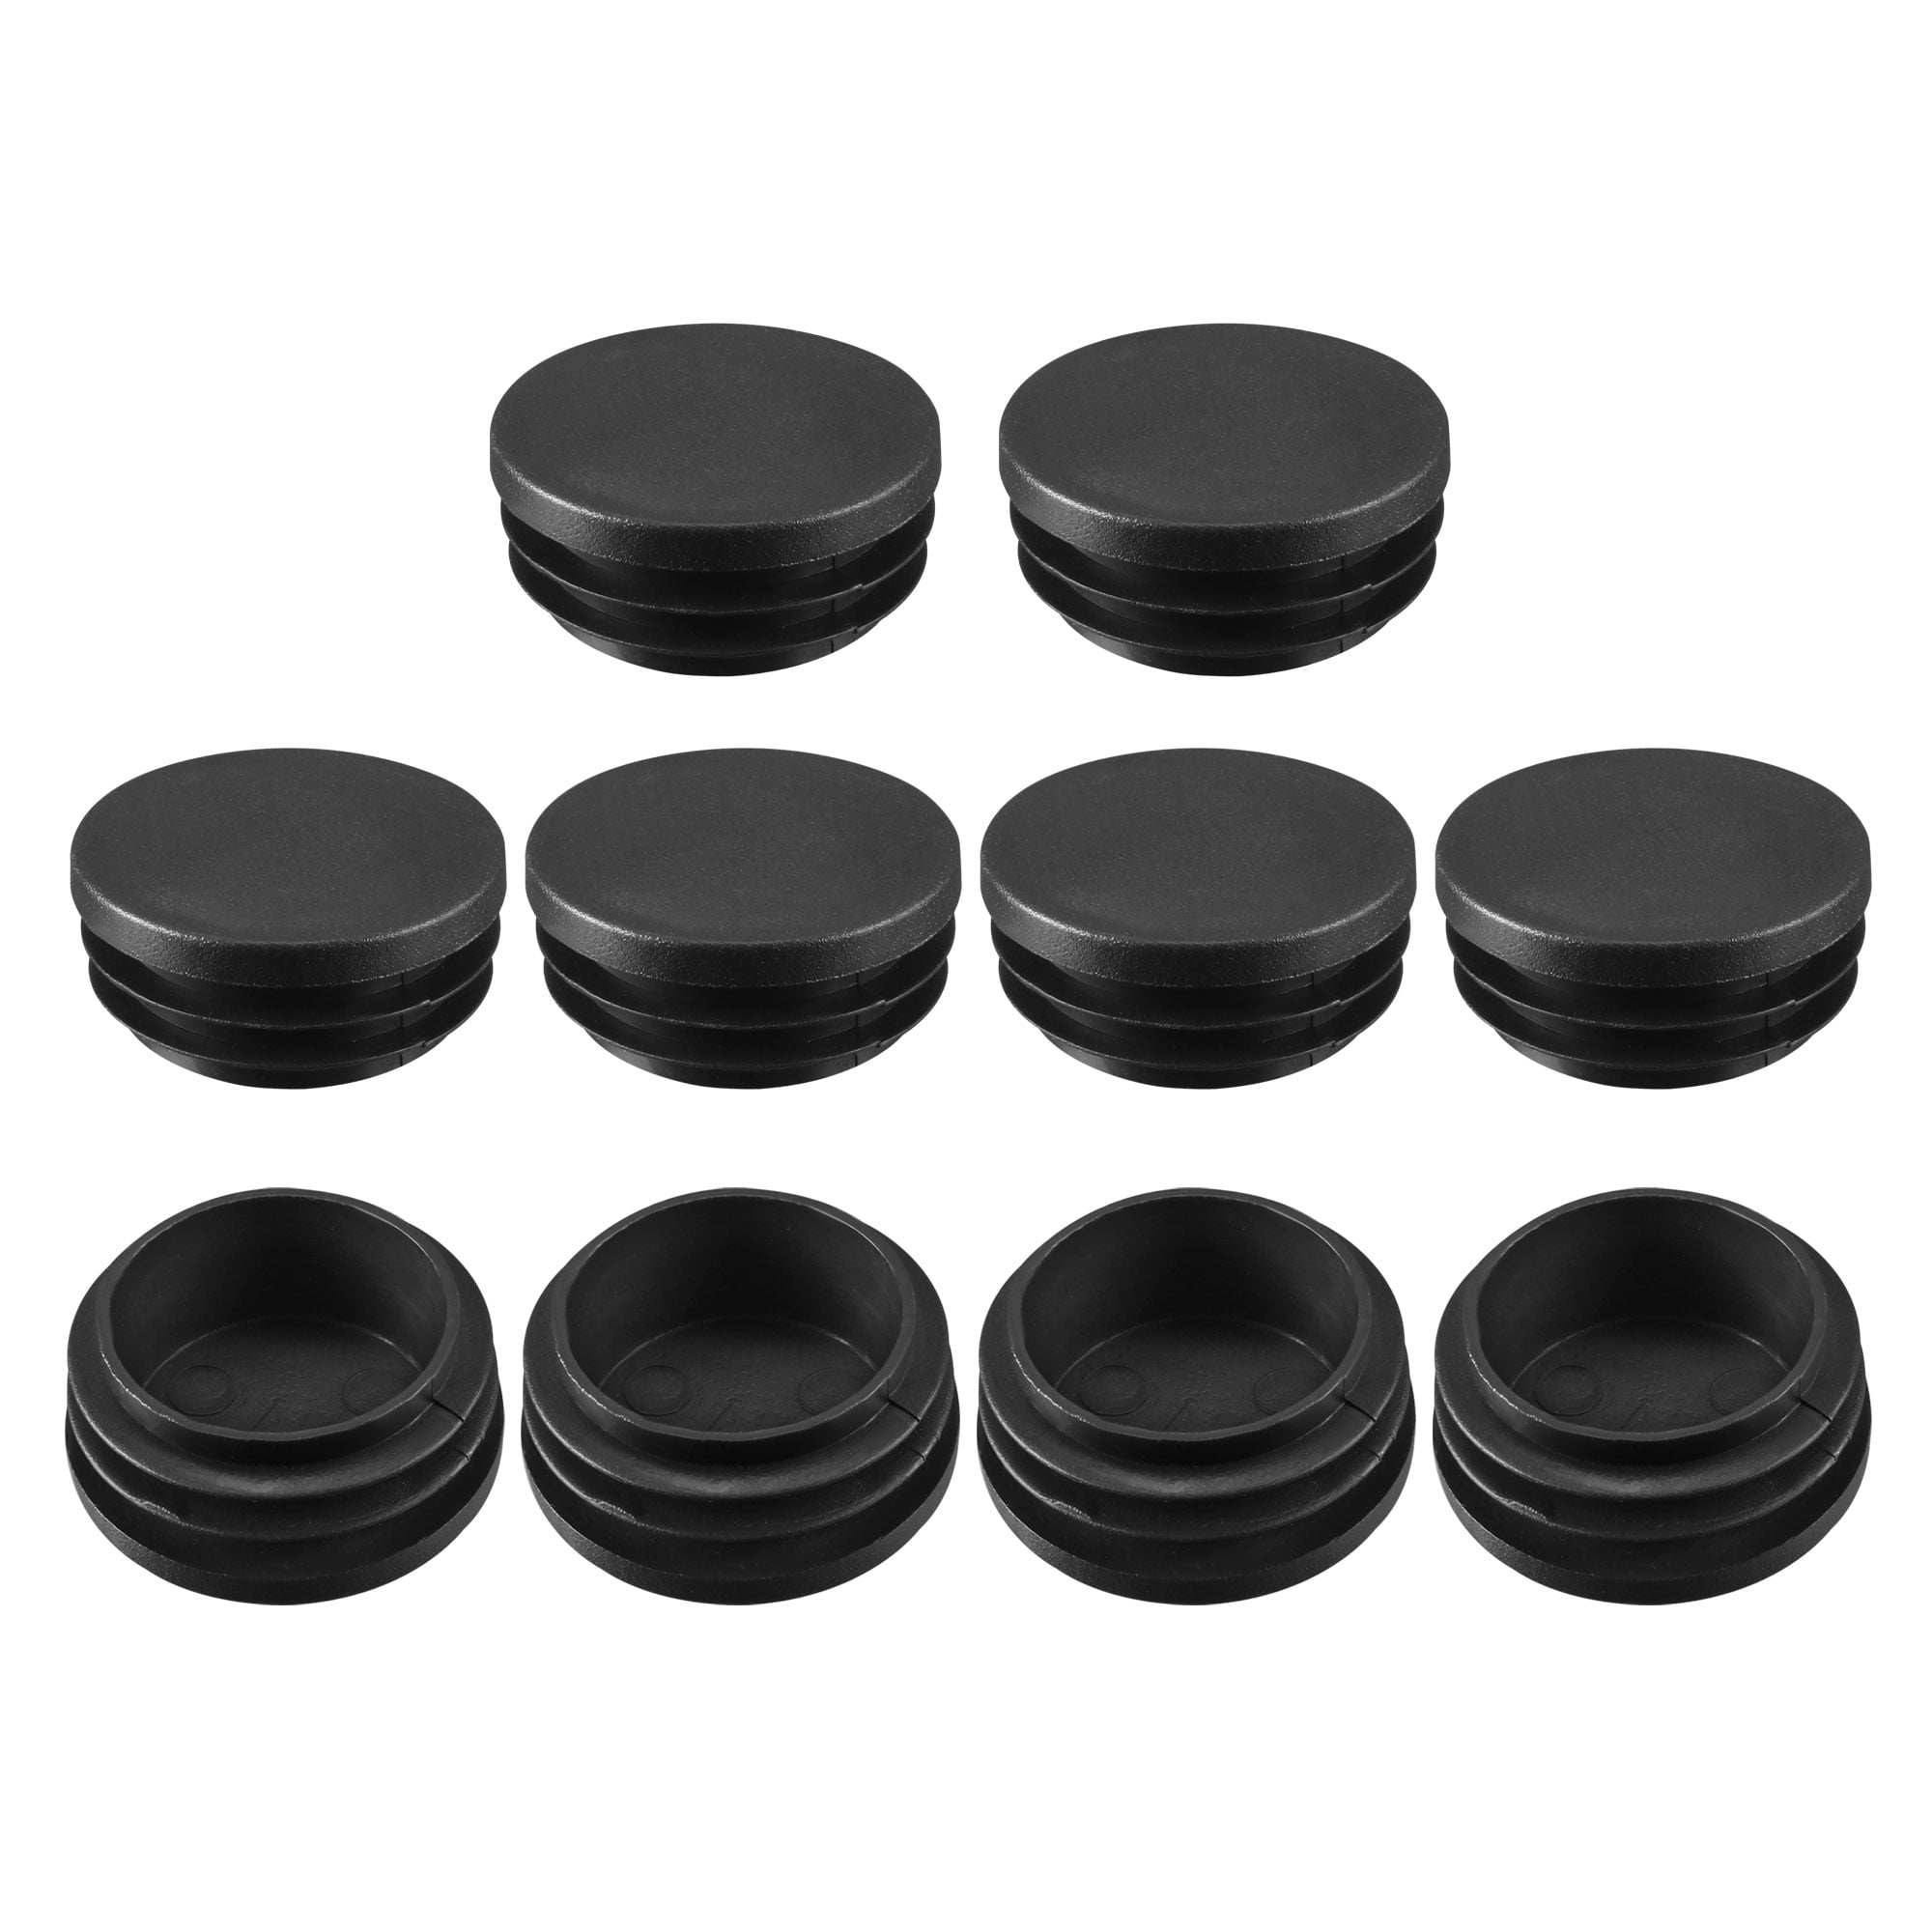 10Pcs 21mm x 12mm Black Conical Recessed Rubber Feet Bumpers Pads N3 